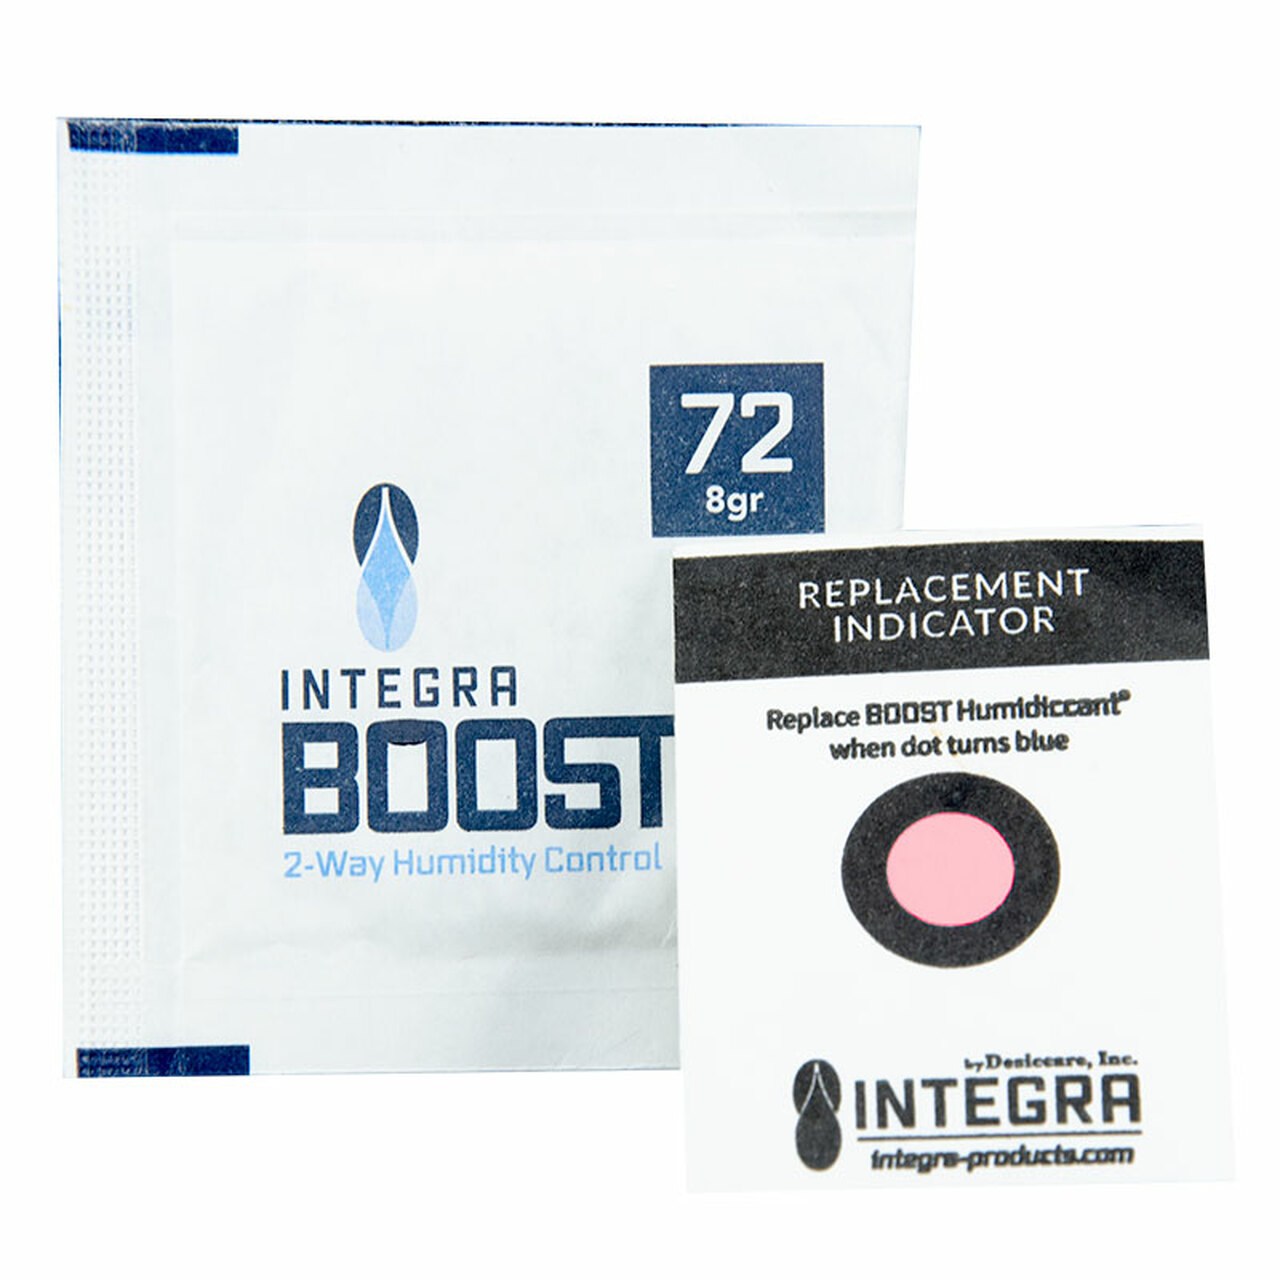 Desiccare Integra BOOST® 72% RH 2-way humidity control packs with humidity indicator cards (HIC)